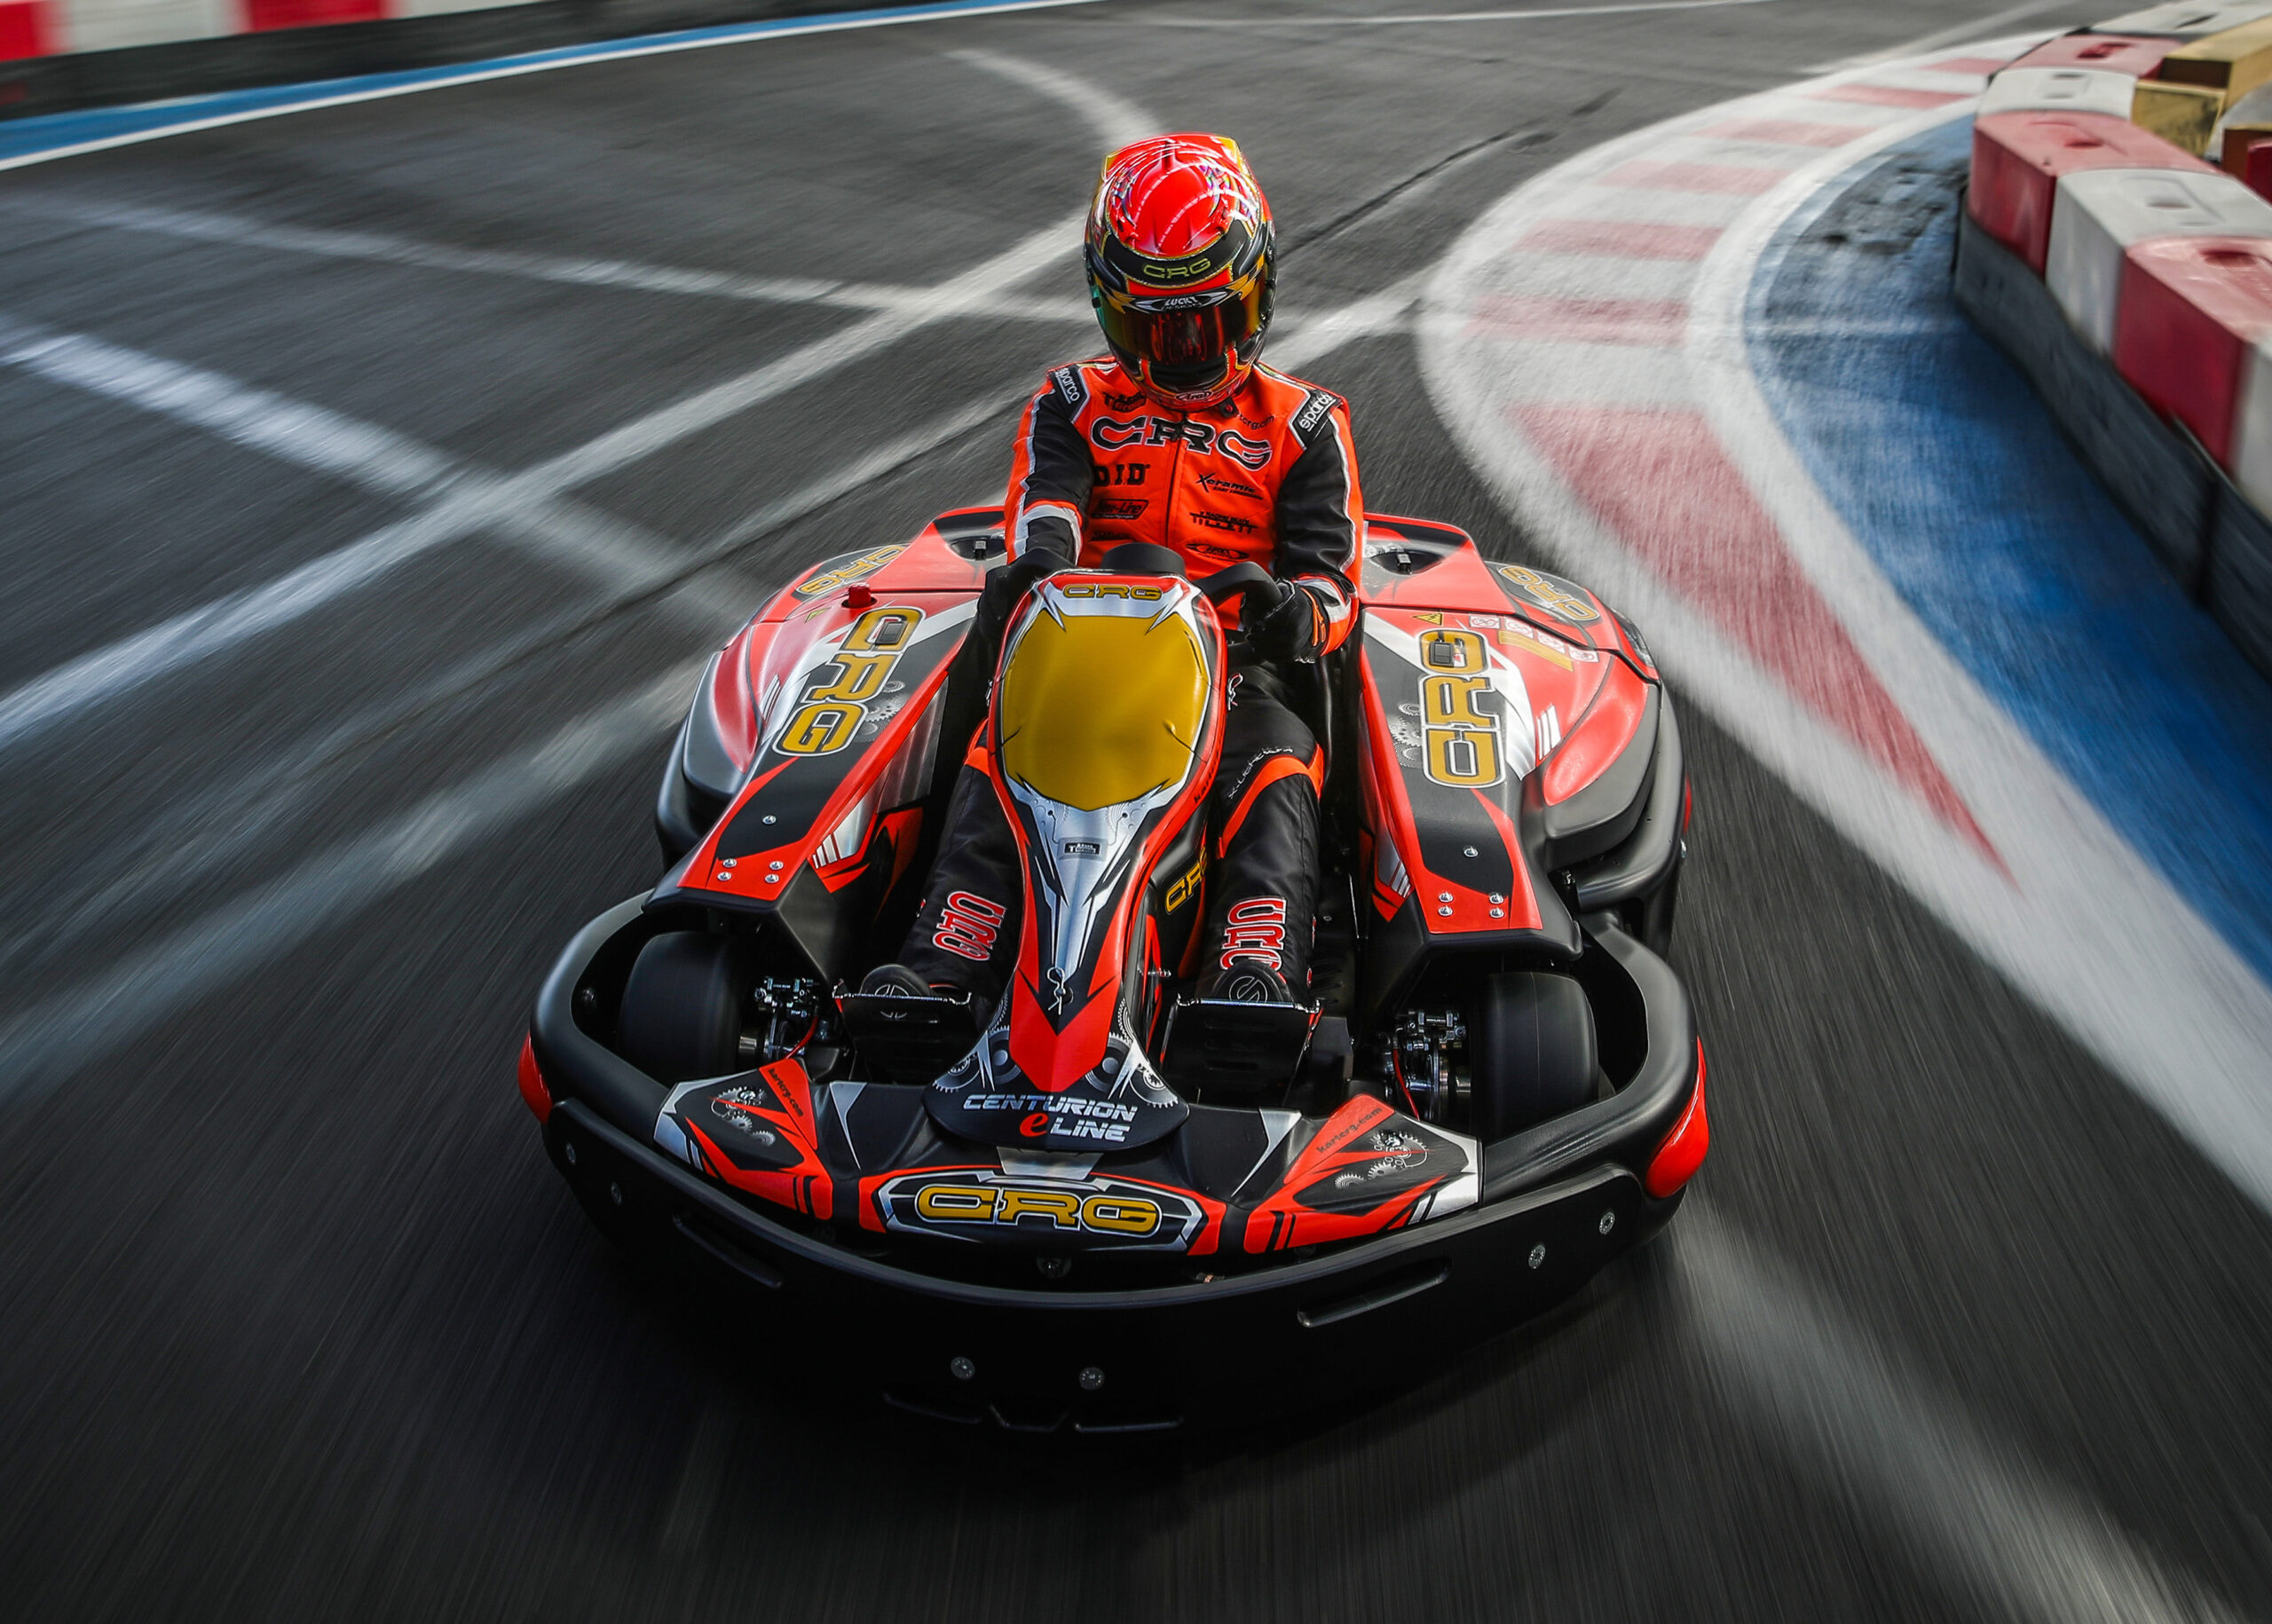 RENTAL KART: HAVE YOU EVER DRIVEN ONE?